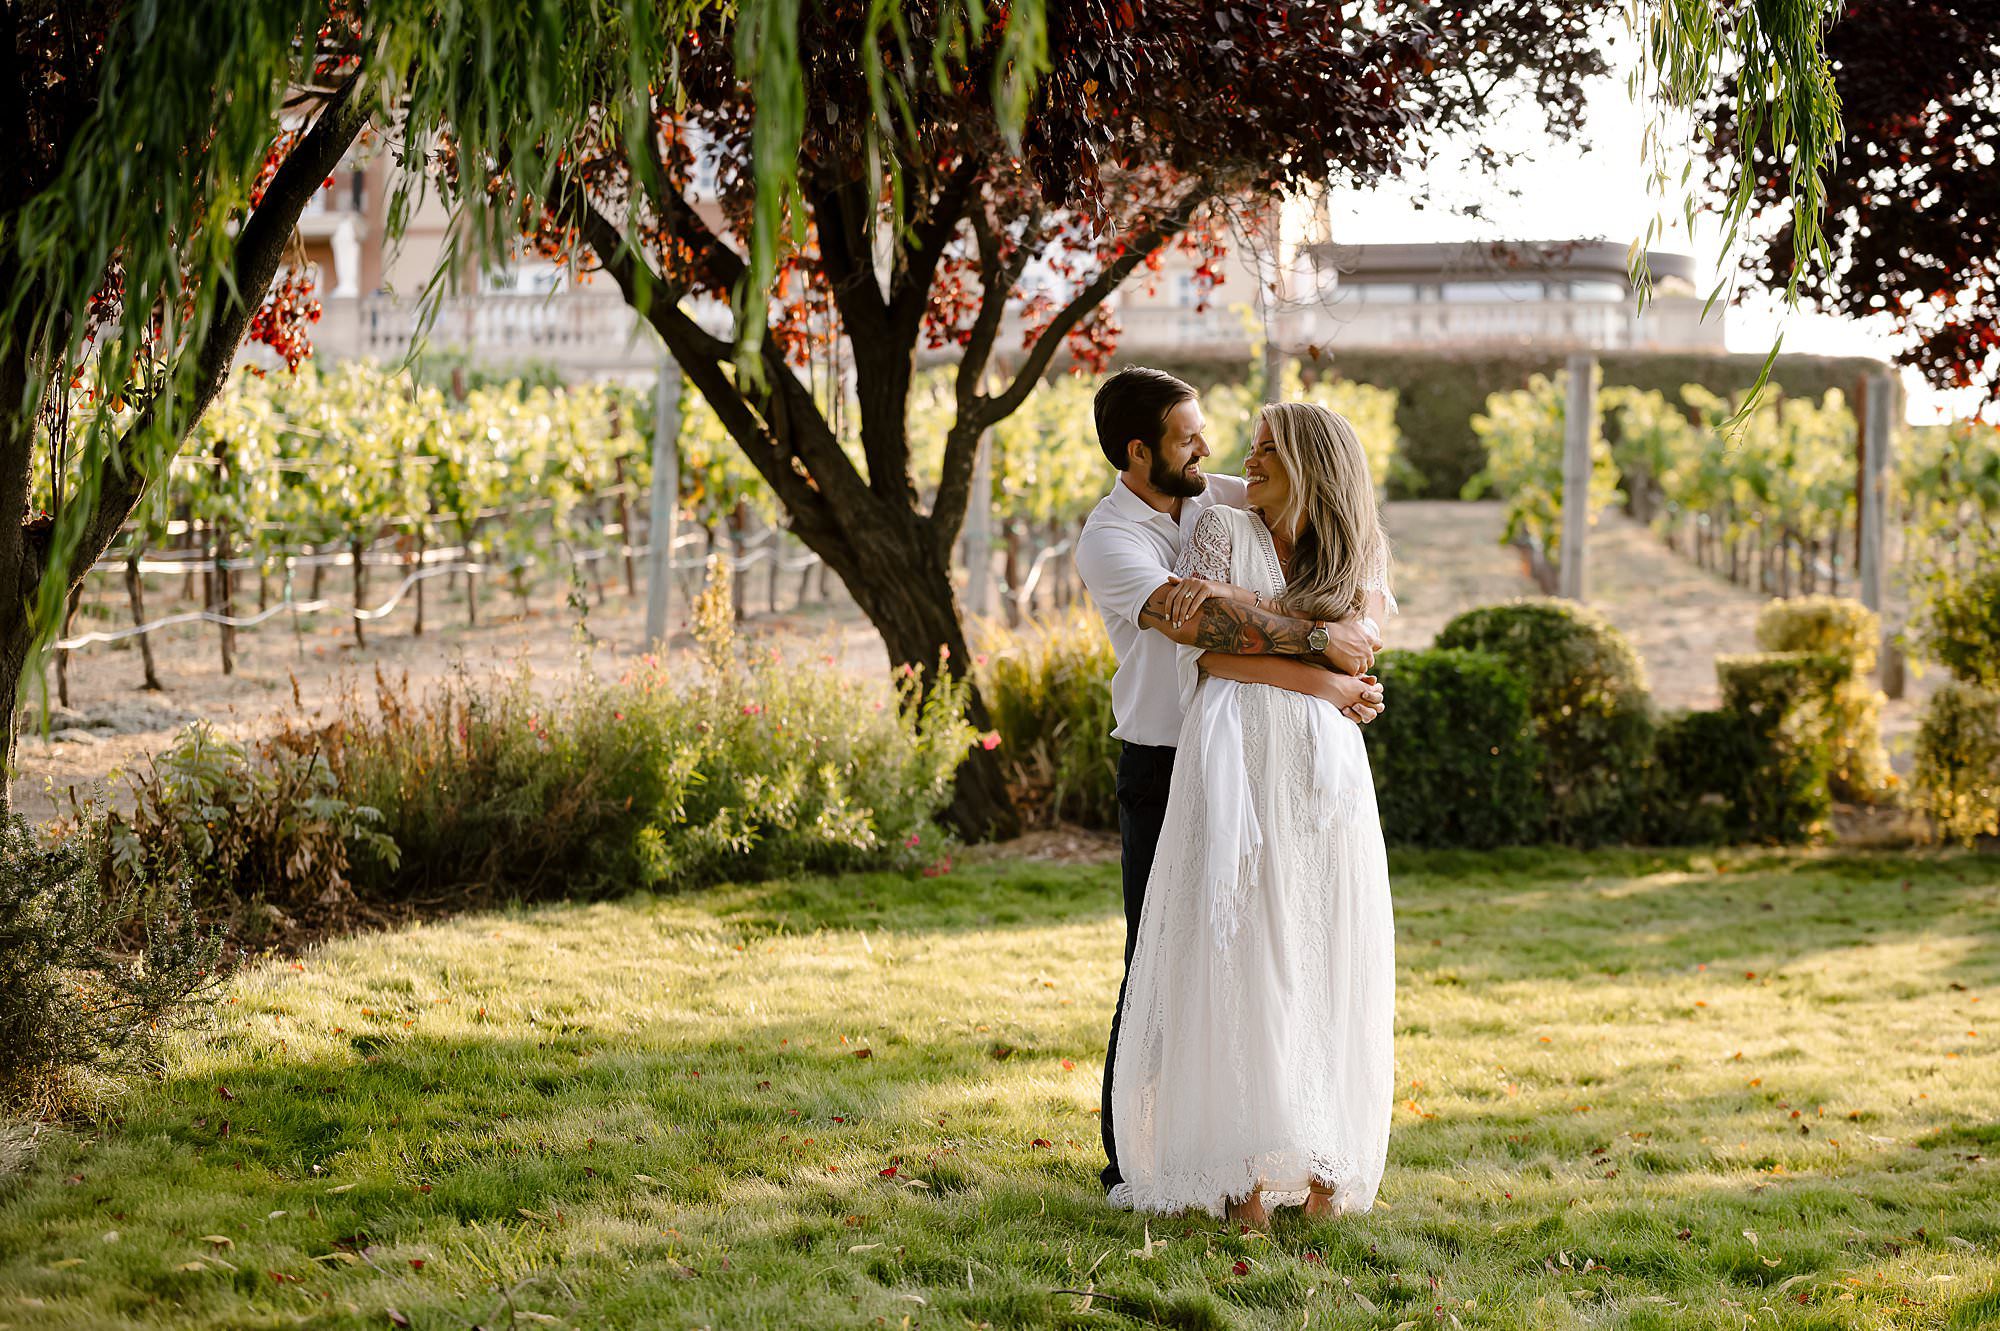 Cameron embraces Melissa at sunset in the garden at Domaine Carneros in Napa